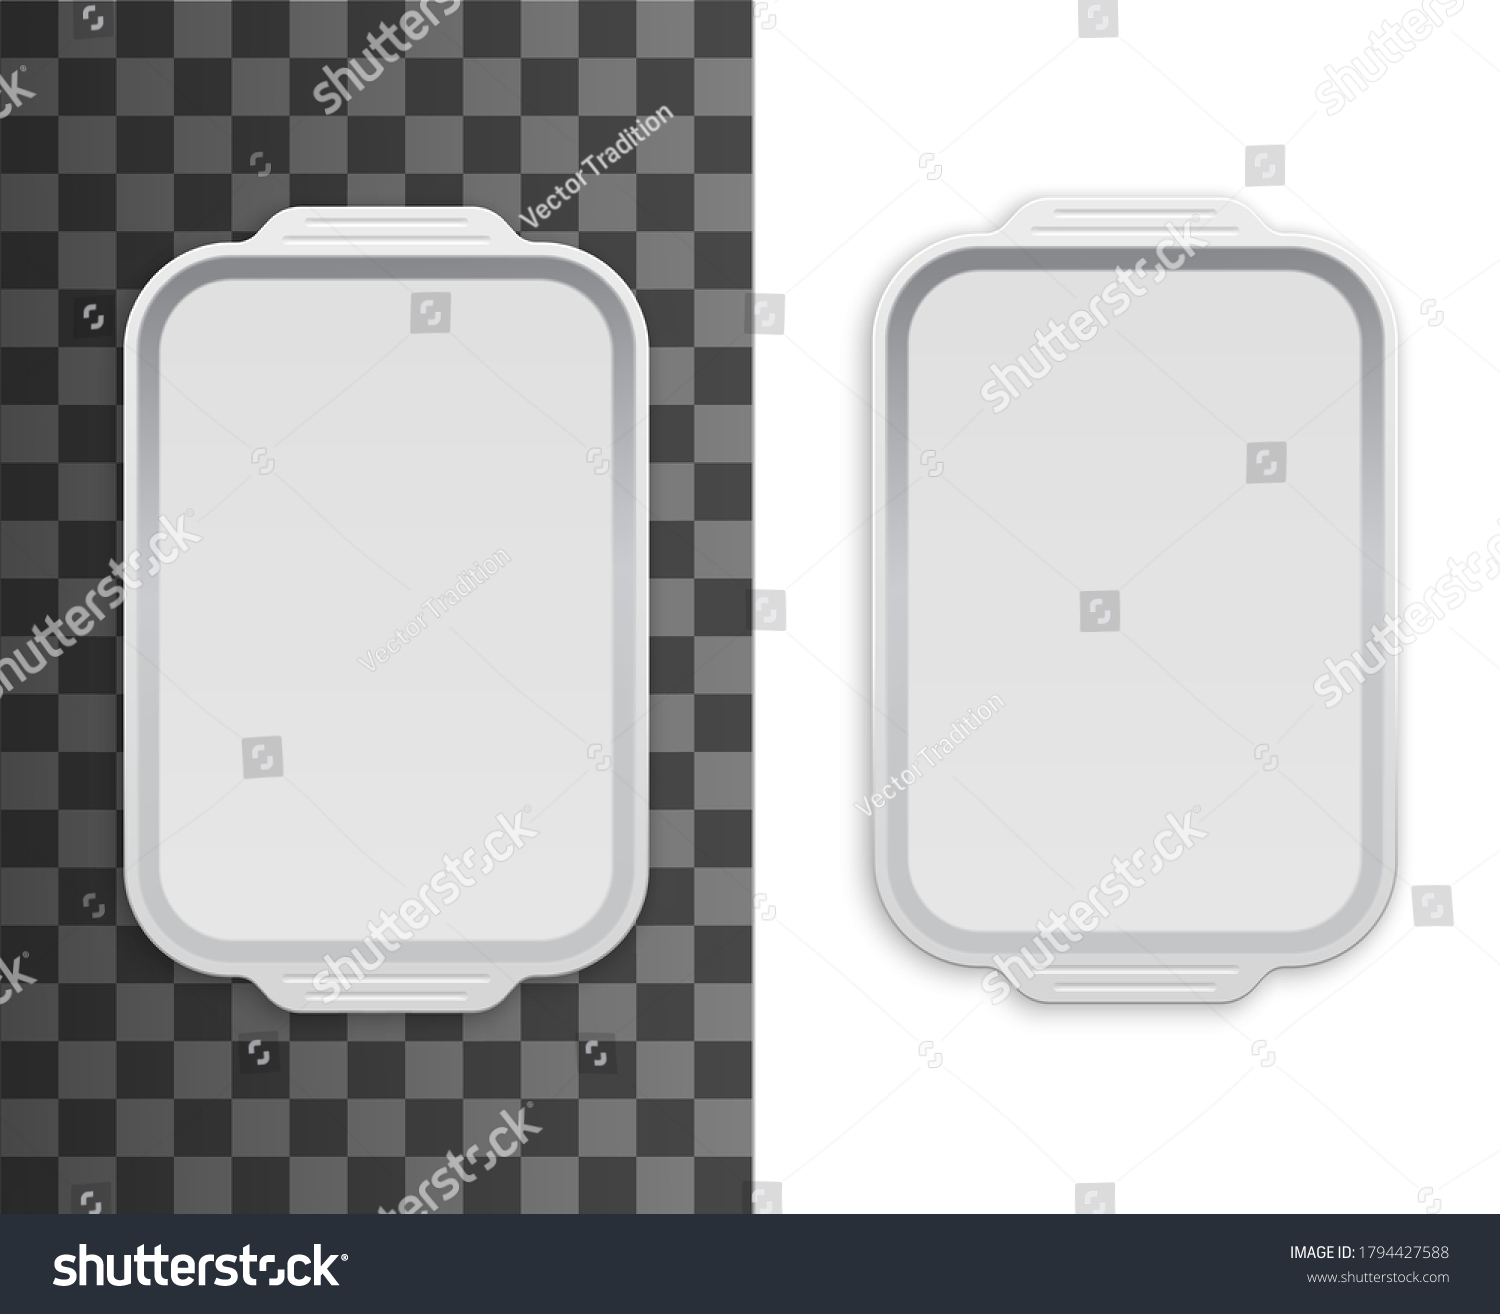 Download Tray Disposable Plastic Food Package Box Stock Vector Royalty Free 1794427588